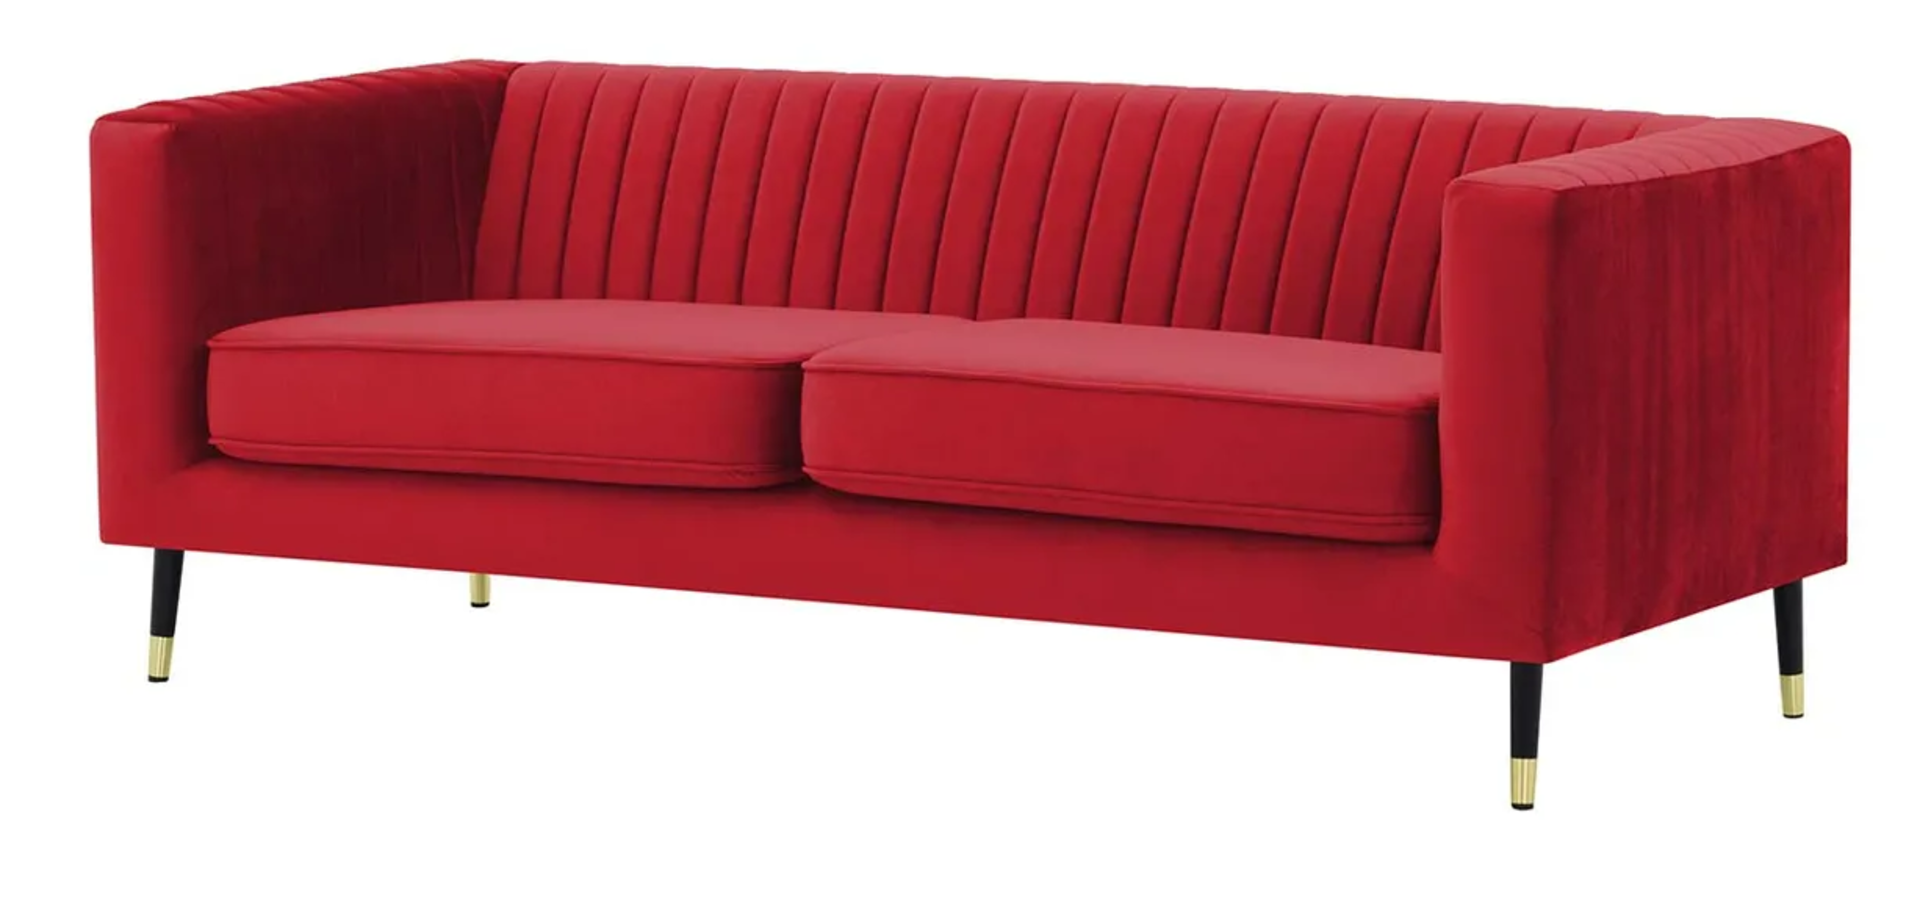 New & Packaged Slender 3 Seater Sofa. RRP £548. People associate sofas with rest and relaxation. - Image 2 of 4